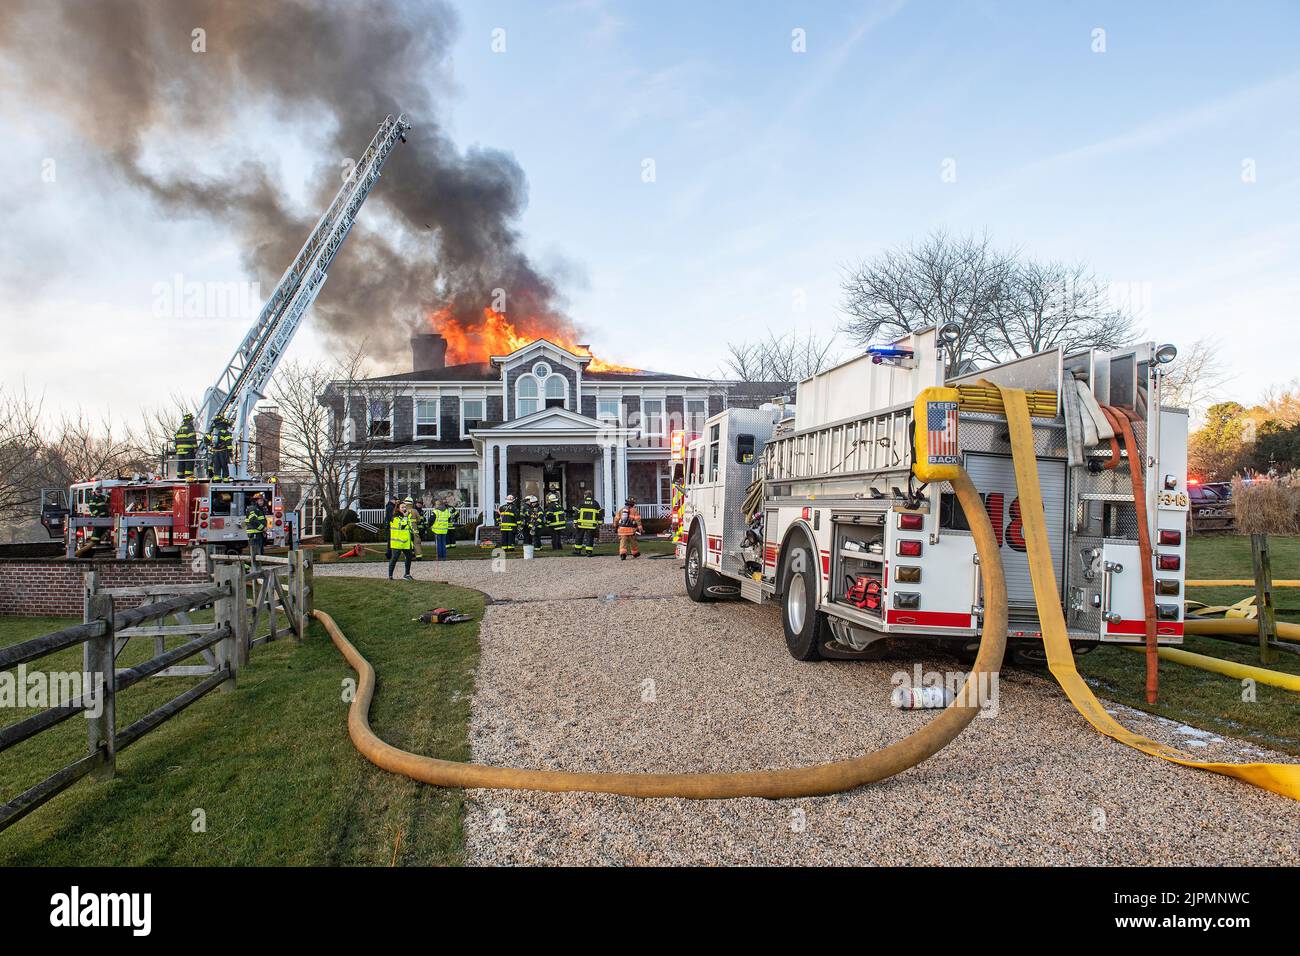 The Bridgehampton Fire Department, assisted by mutual aid from several other local fire departments, battled a working structure fire in the roof of a Stock Photo